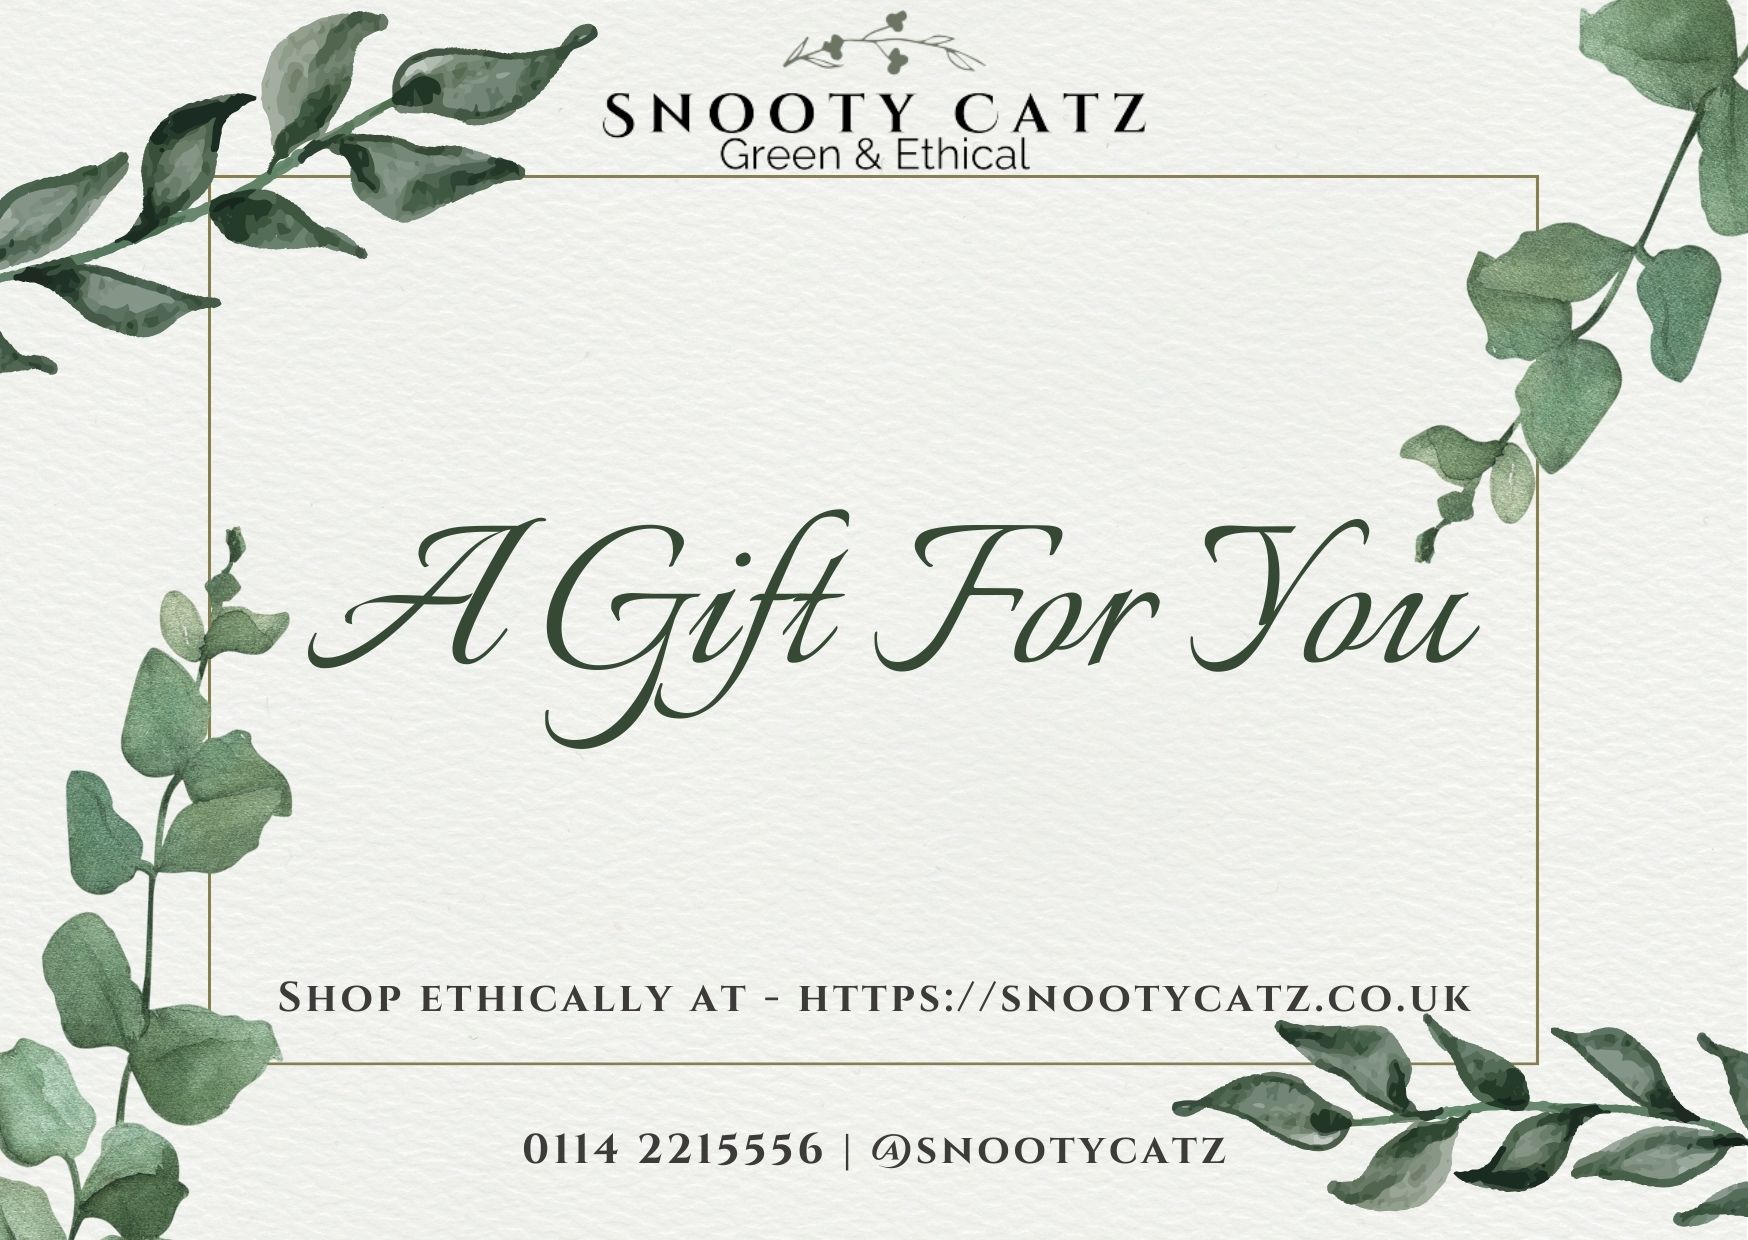 Snooty Catz A Gift for you